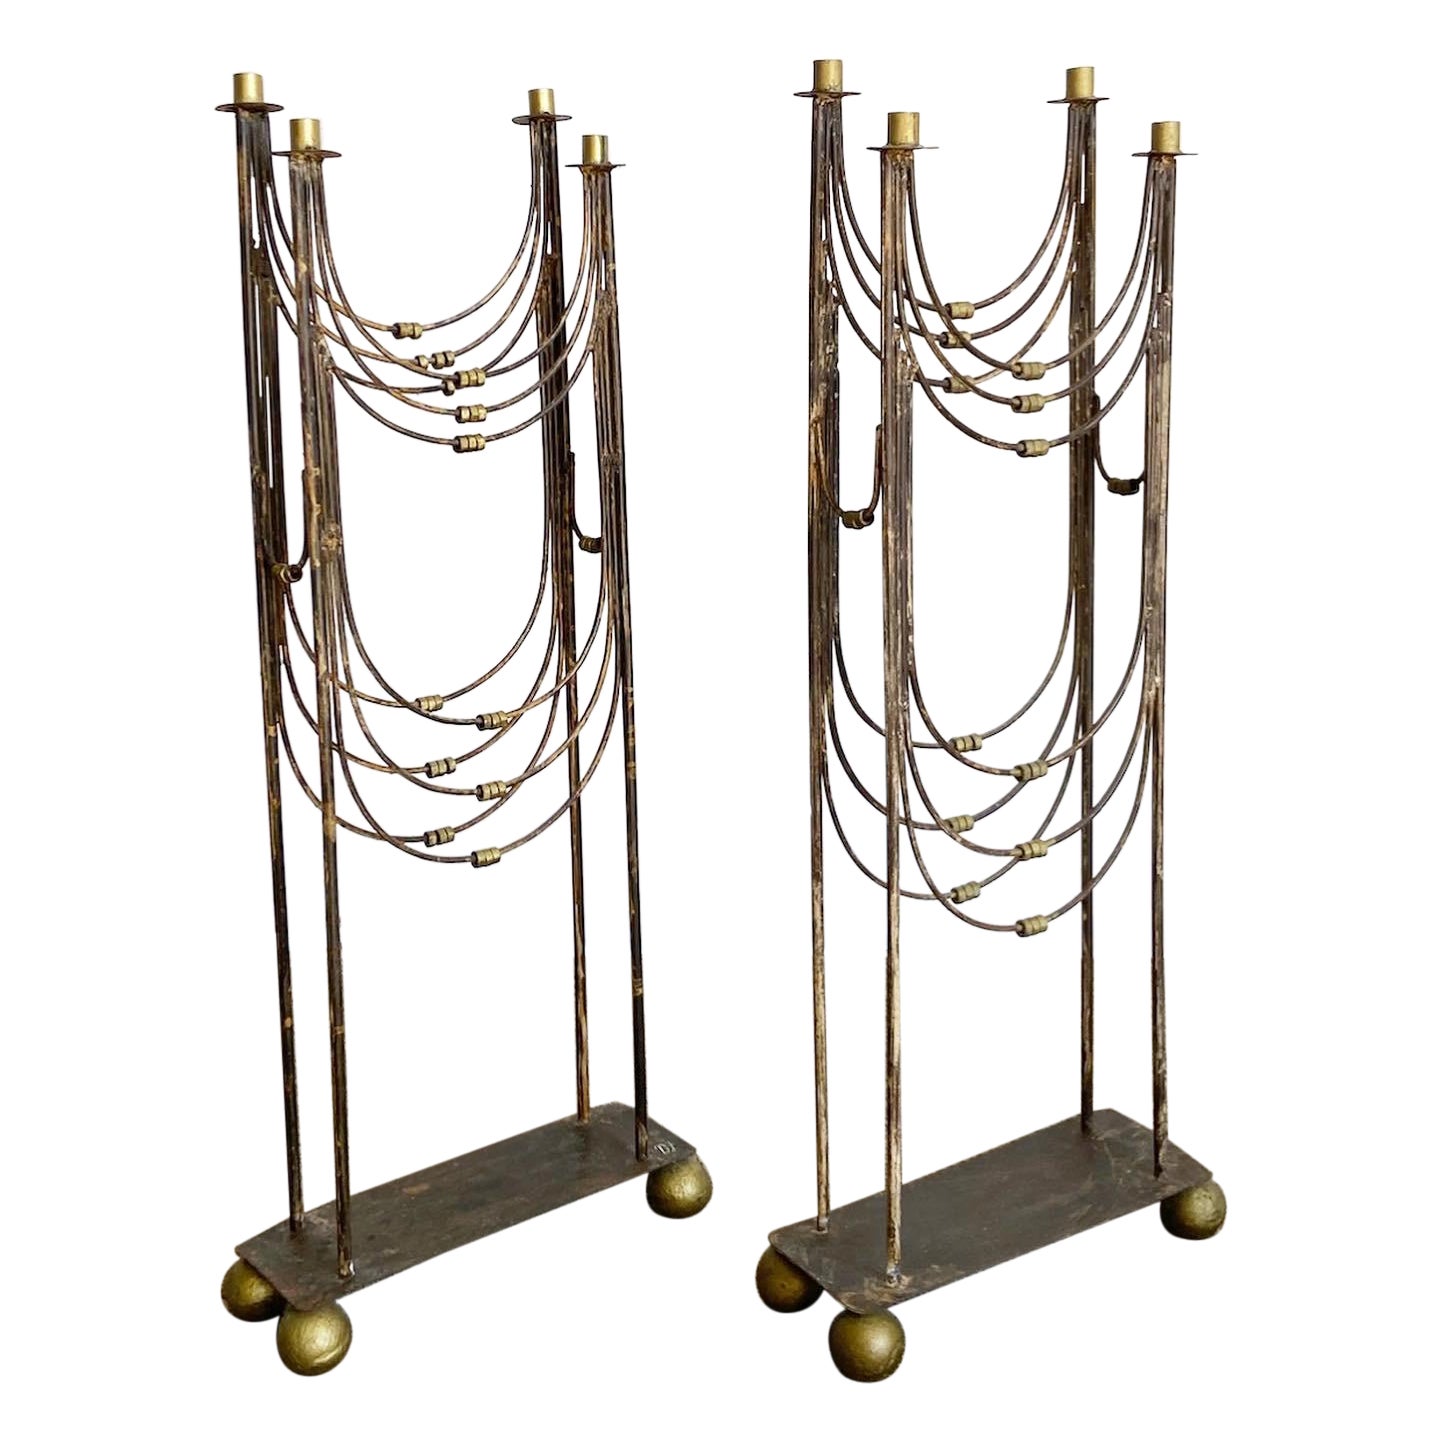 Regency Gold and Silver Metal 4 Headed Floor Candelabras - a Pair For Sale